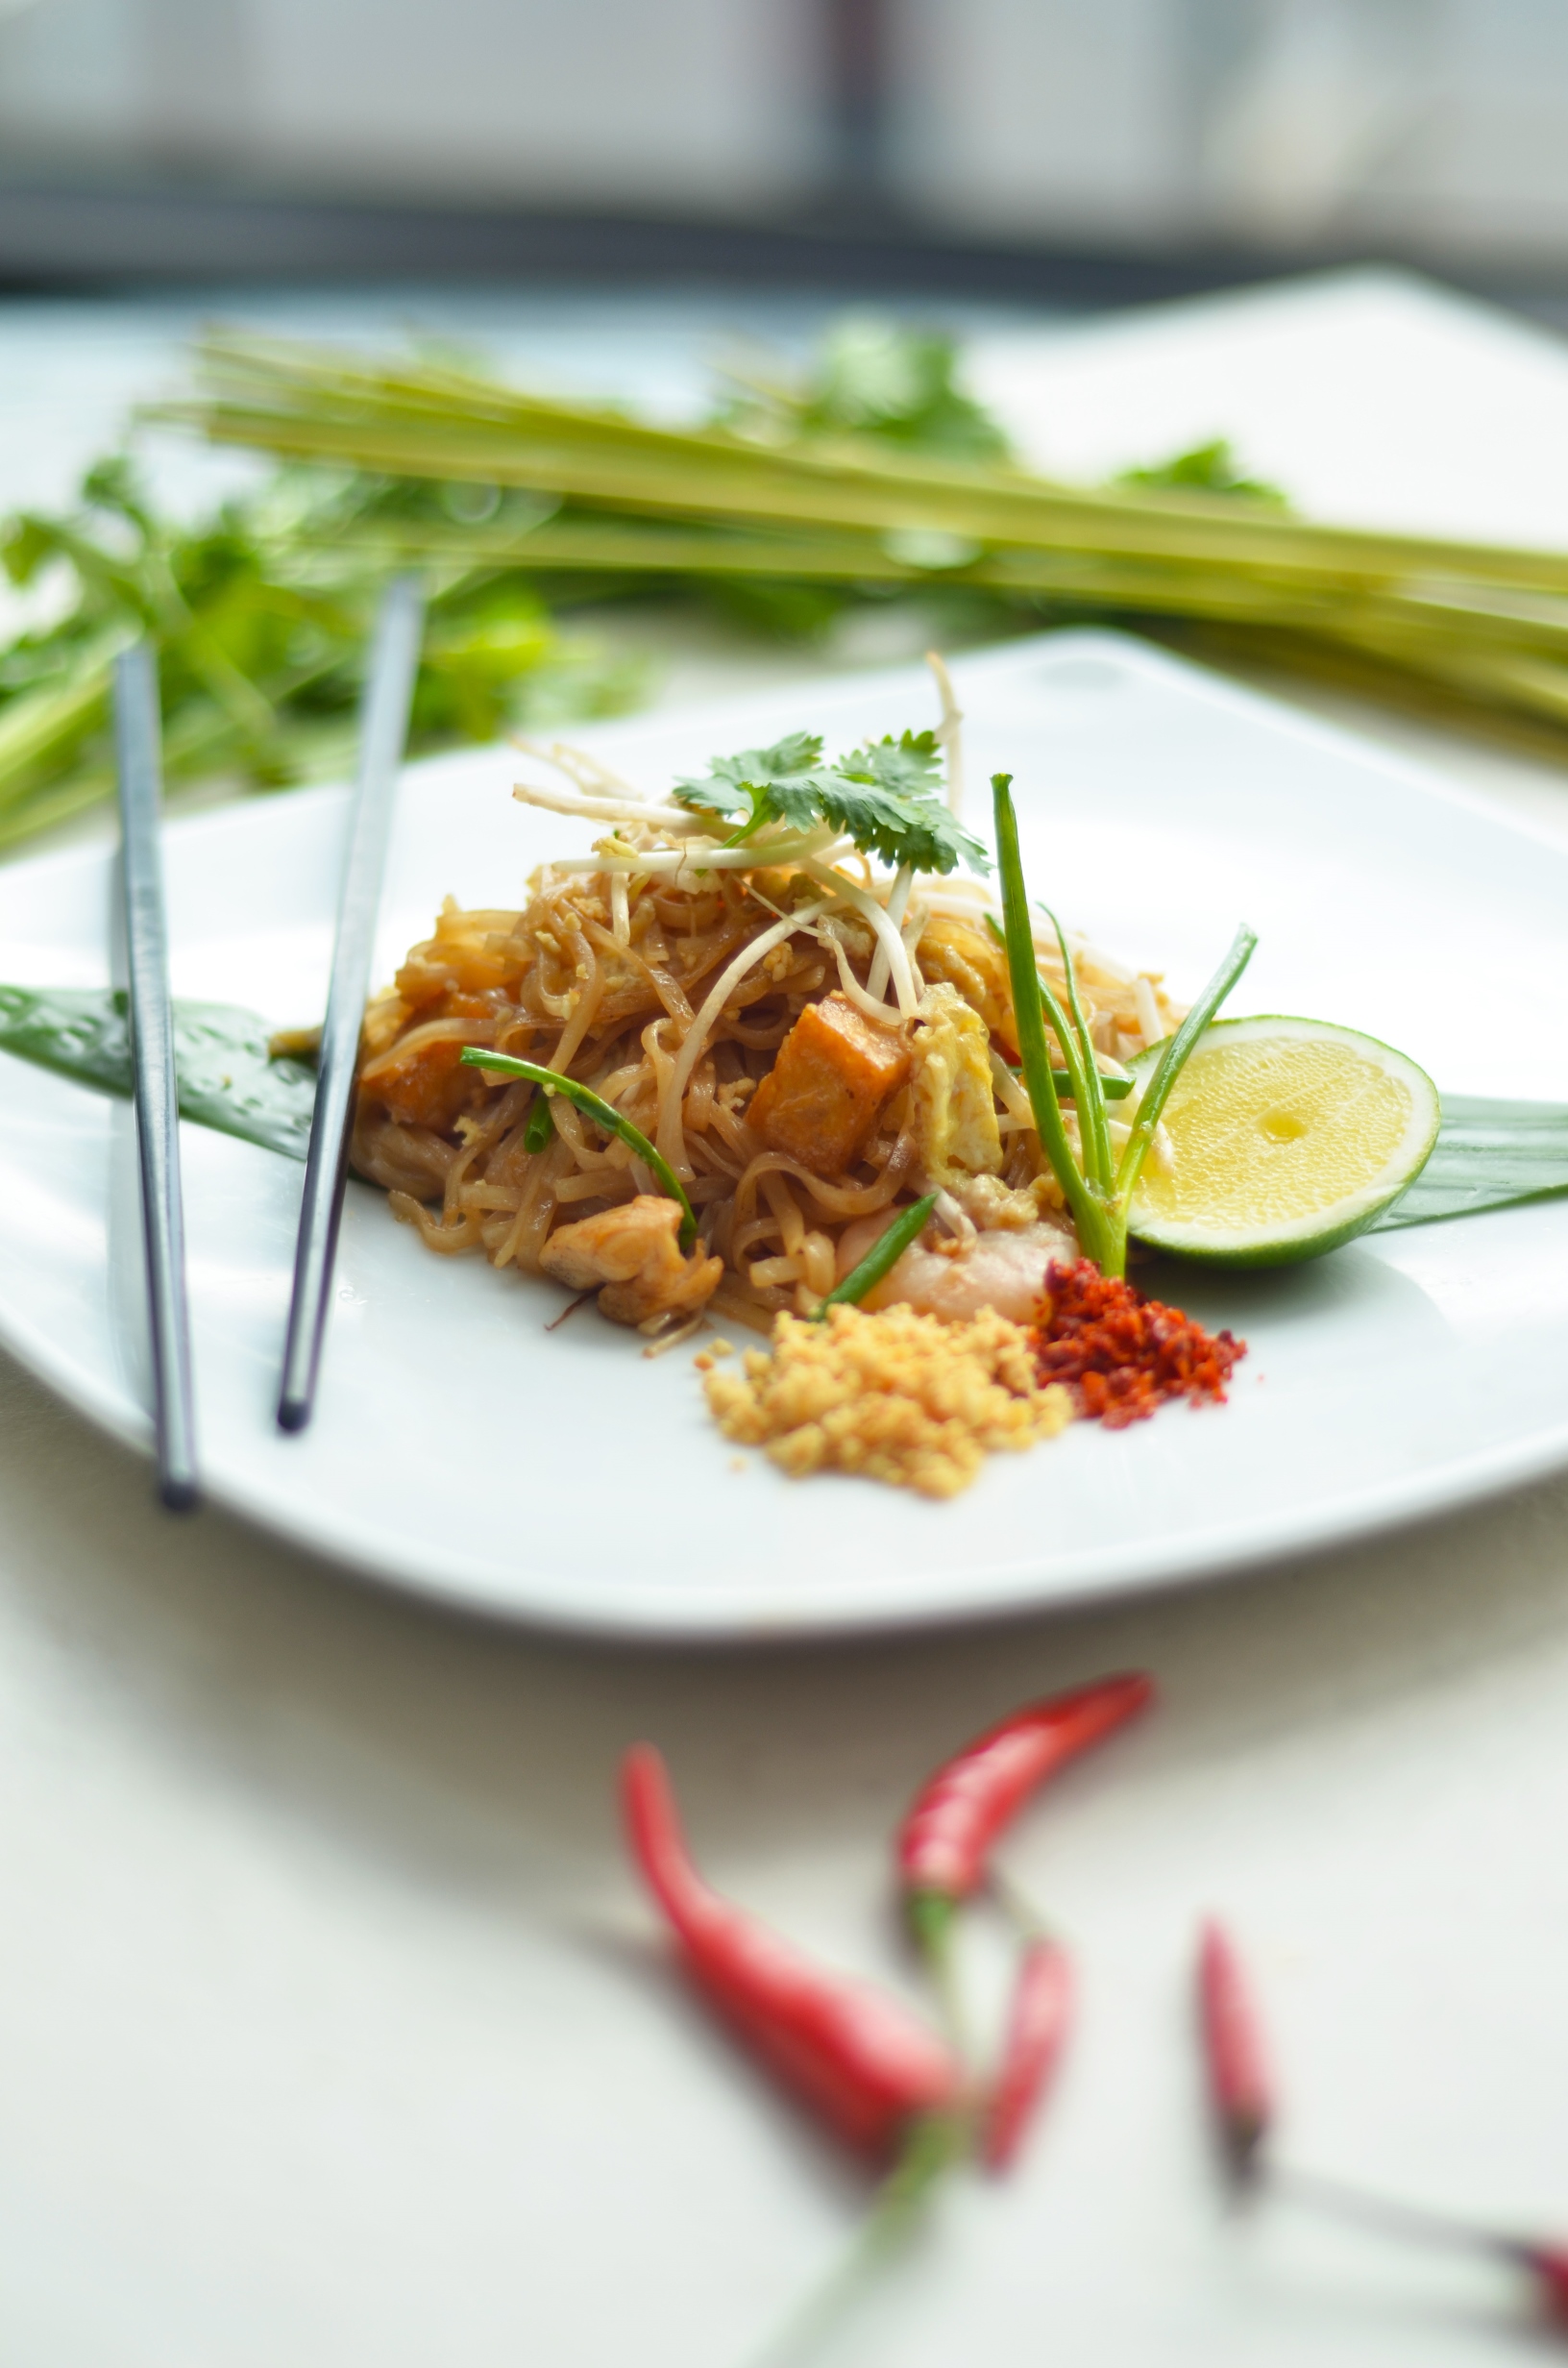 Amazing Songkran: A culinary voyage to Thailand